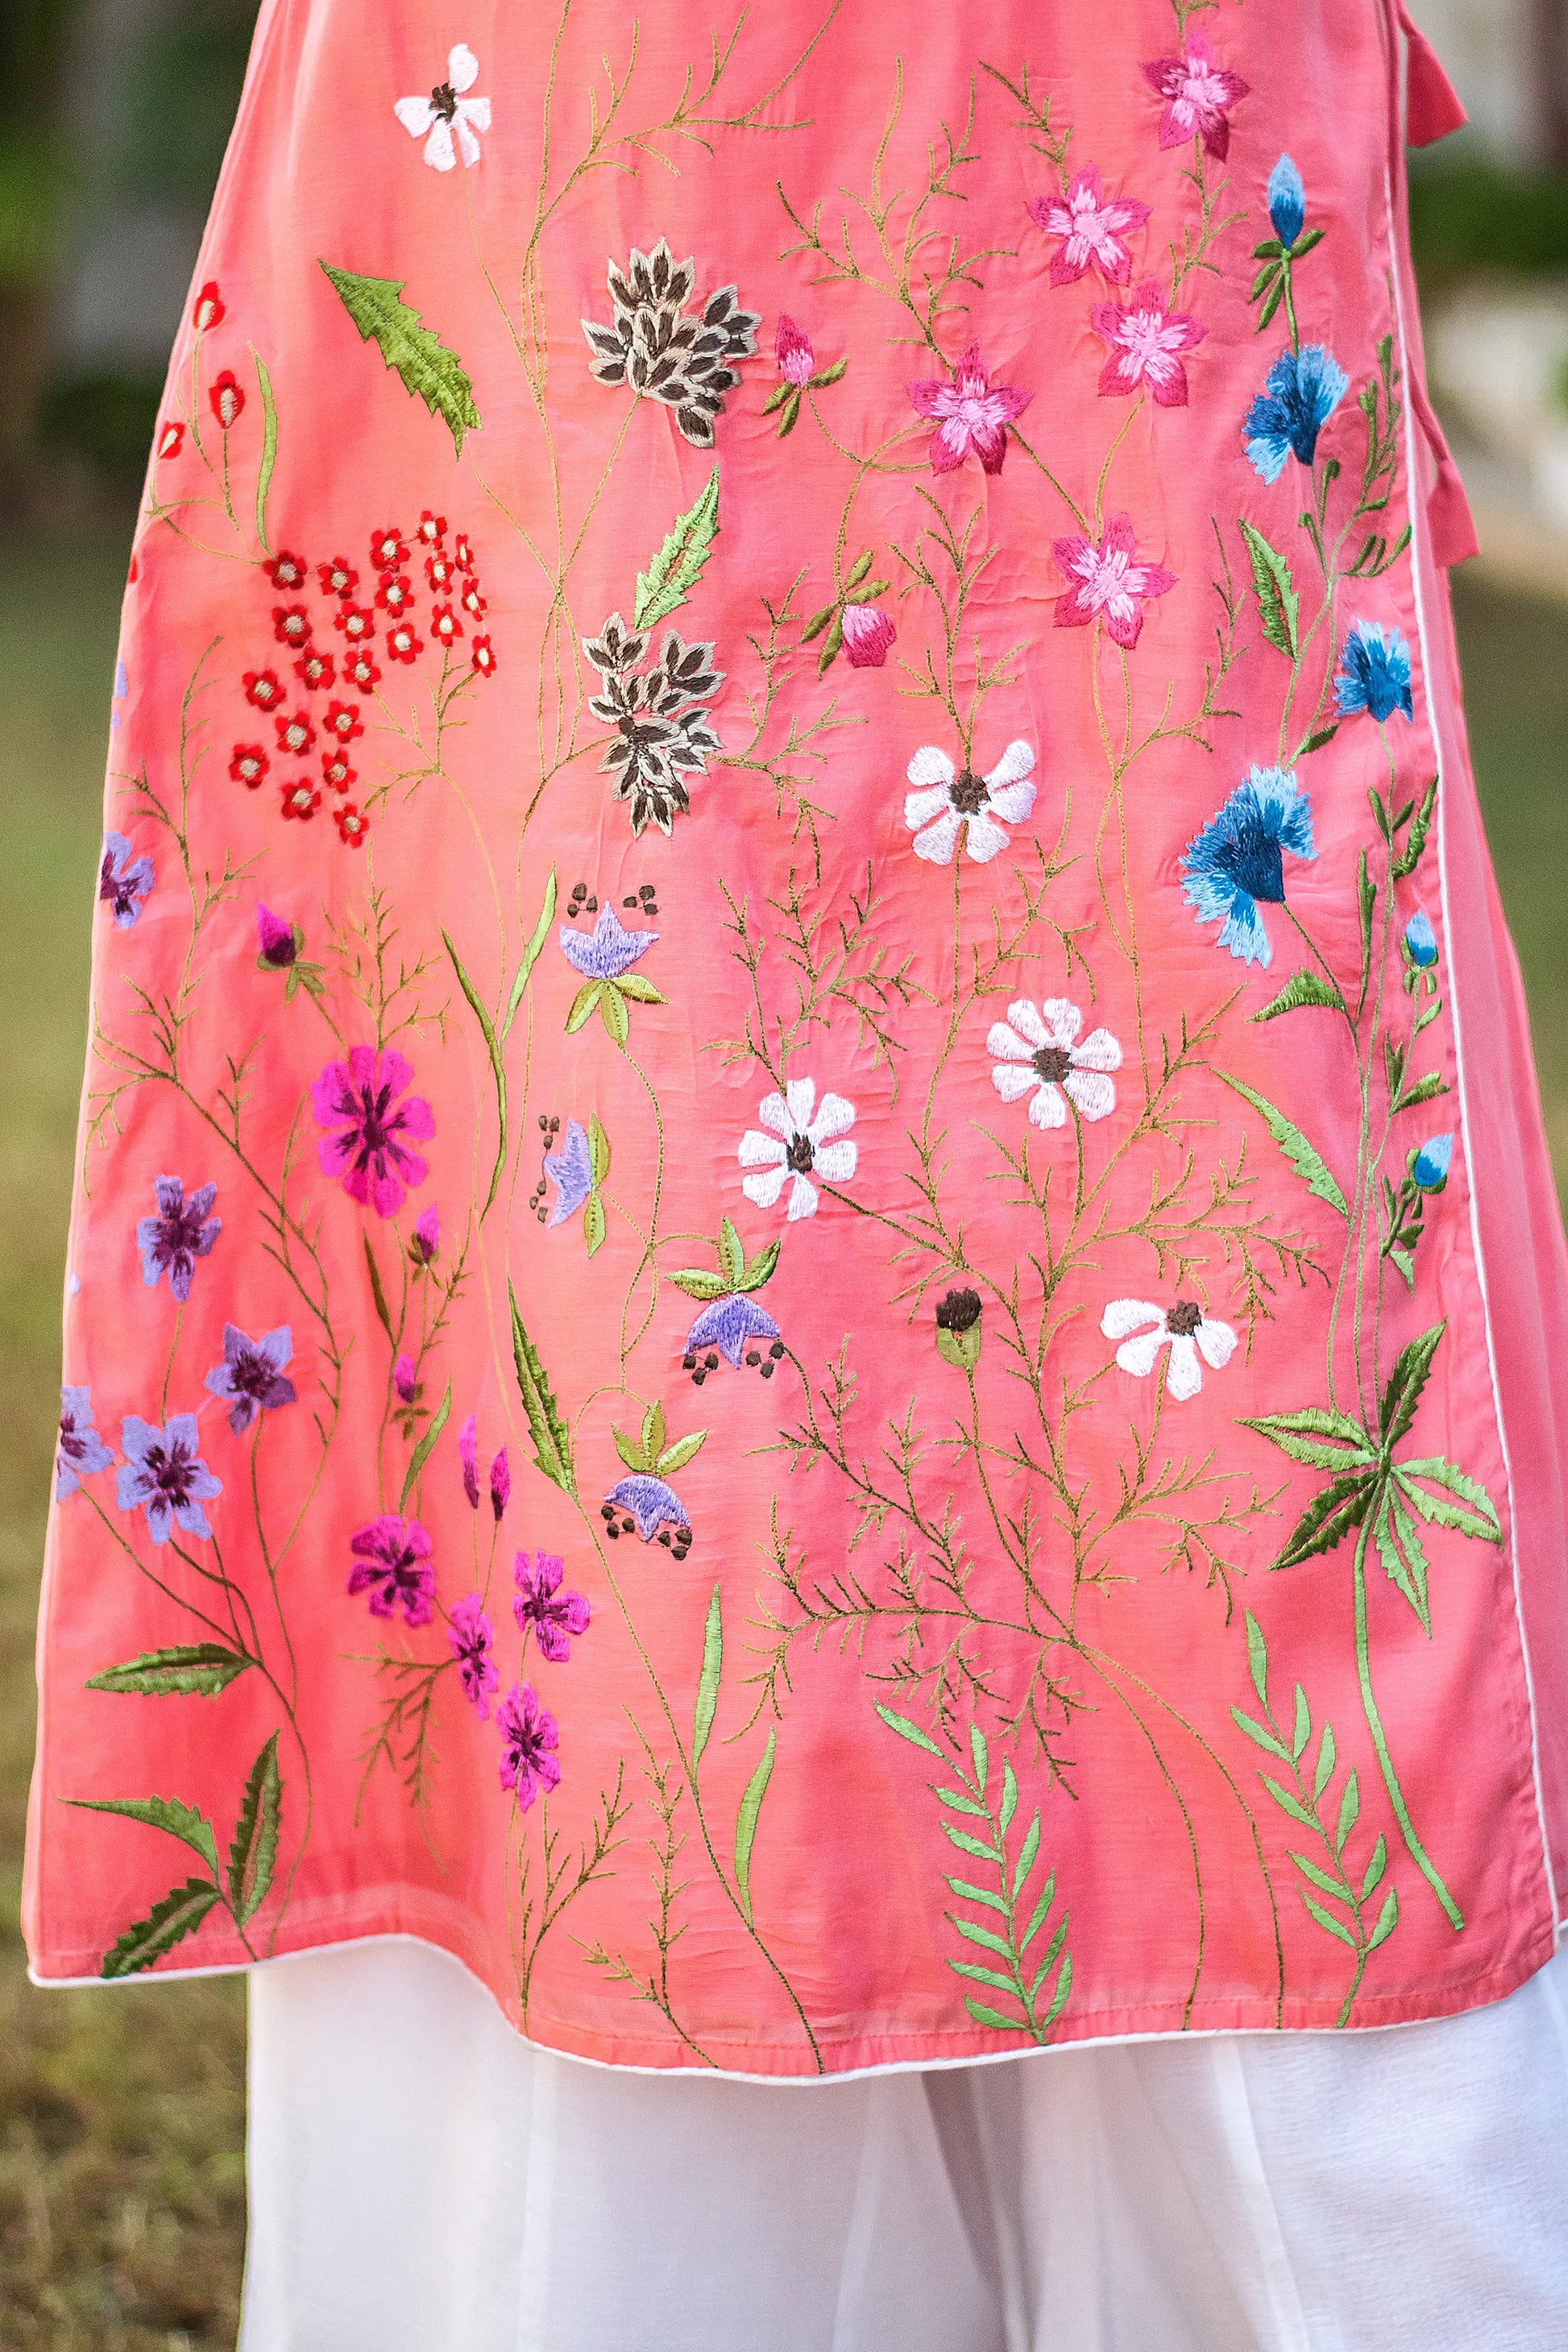 Detailed shot of the multicolour floral embroidery on the pink kurta as styled by the mode